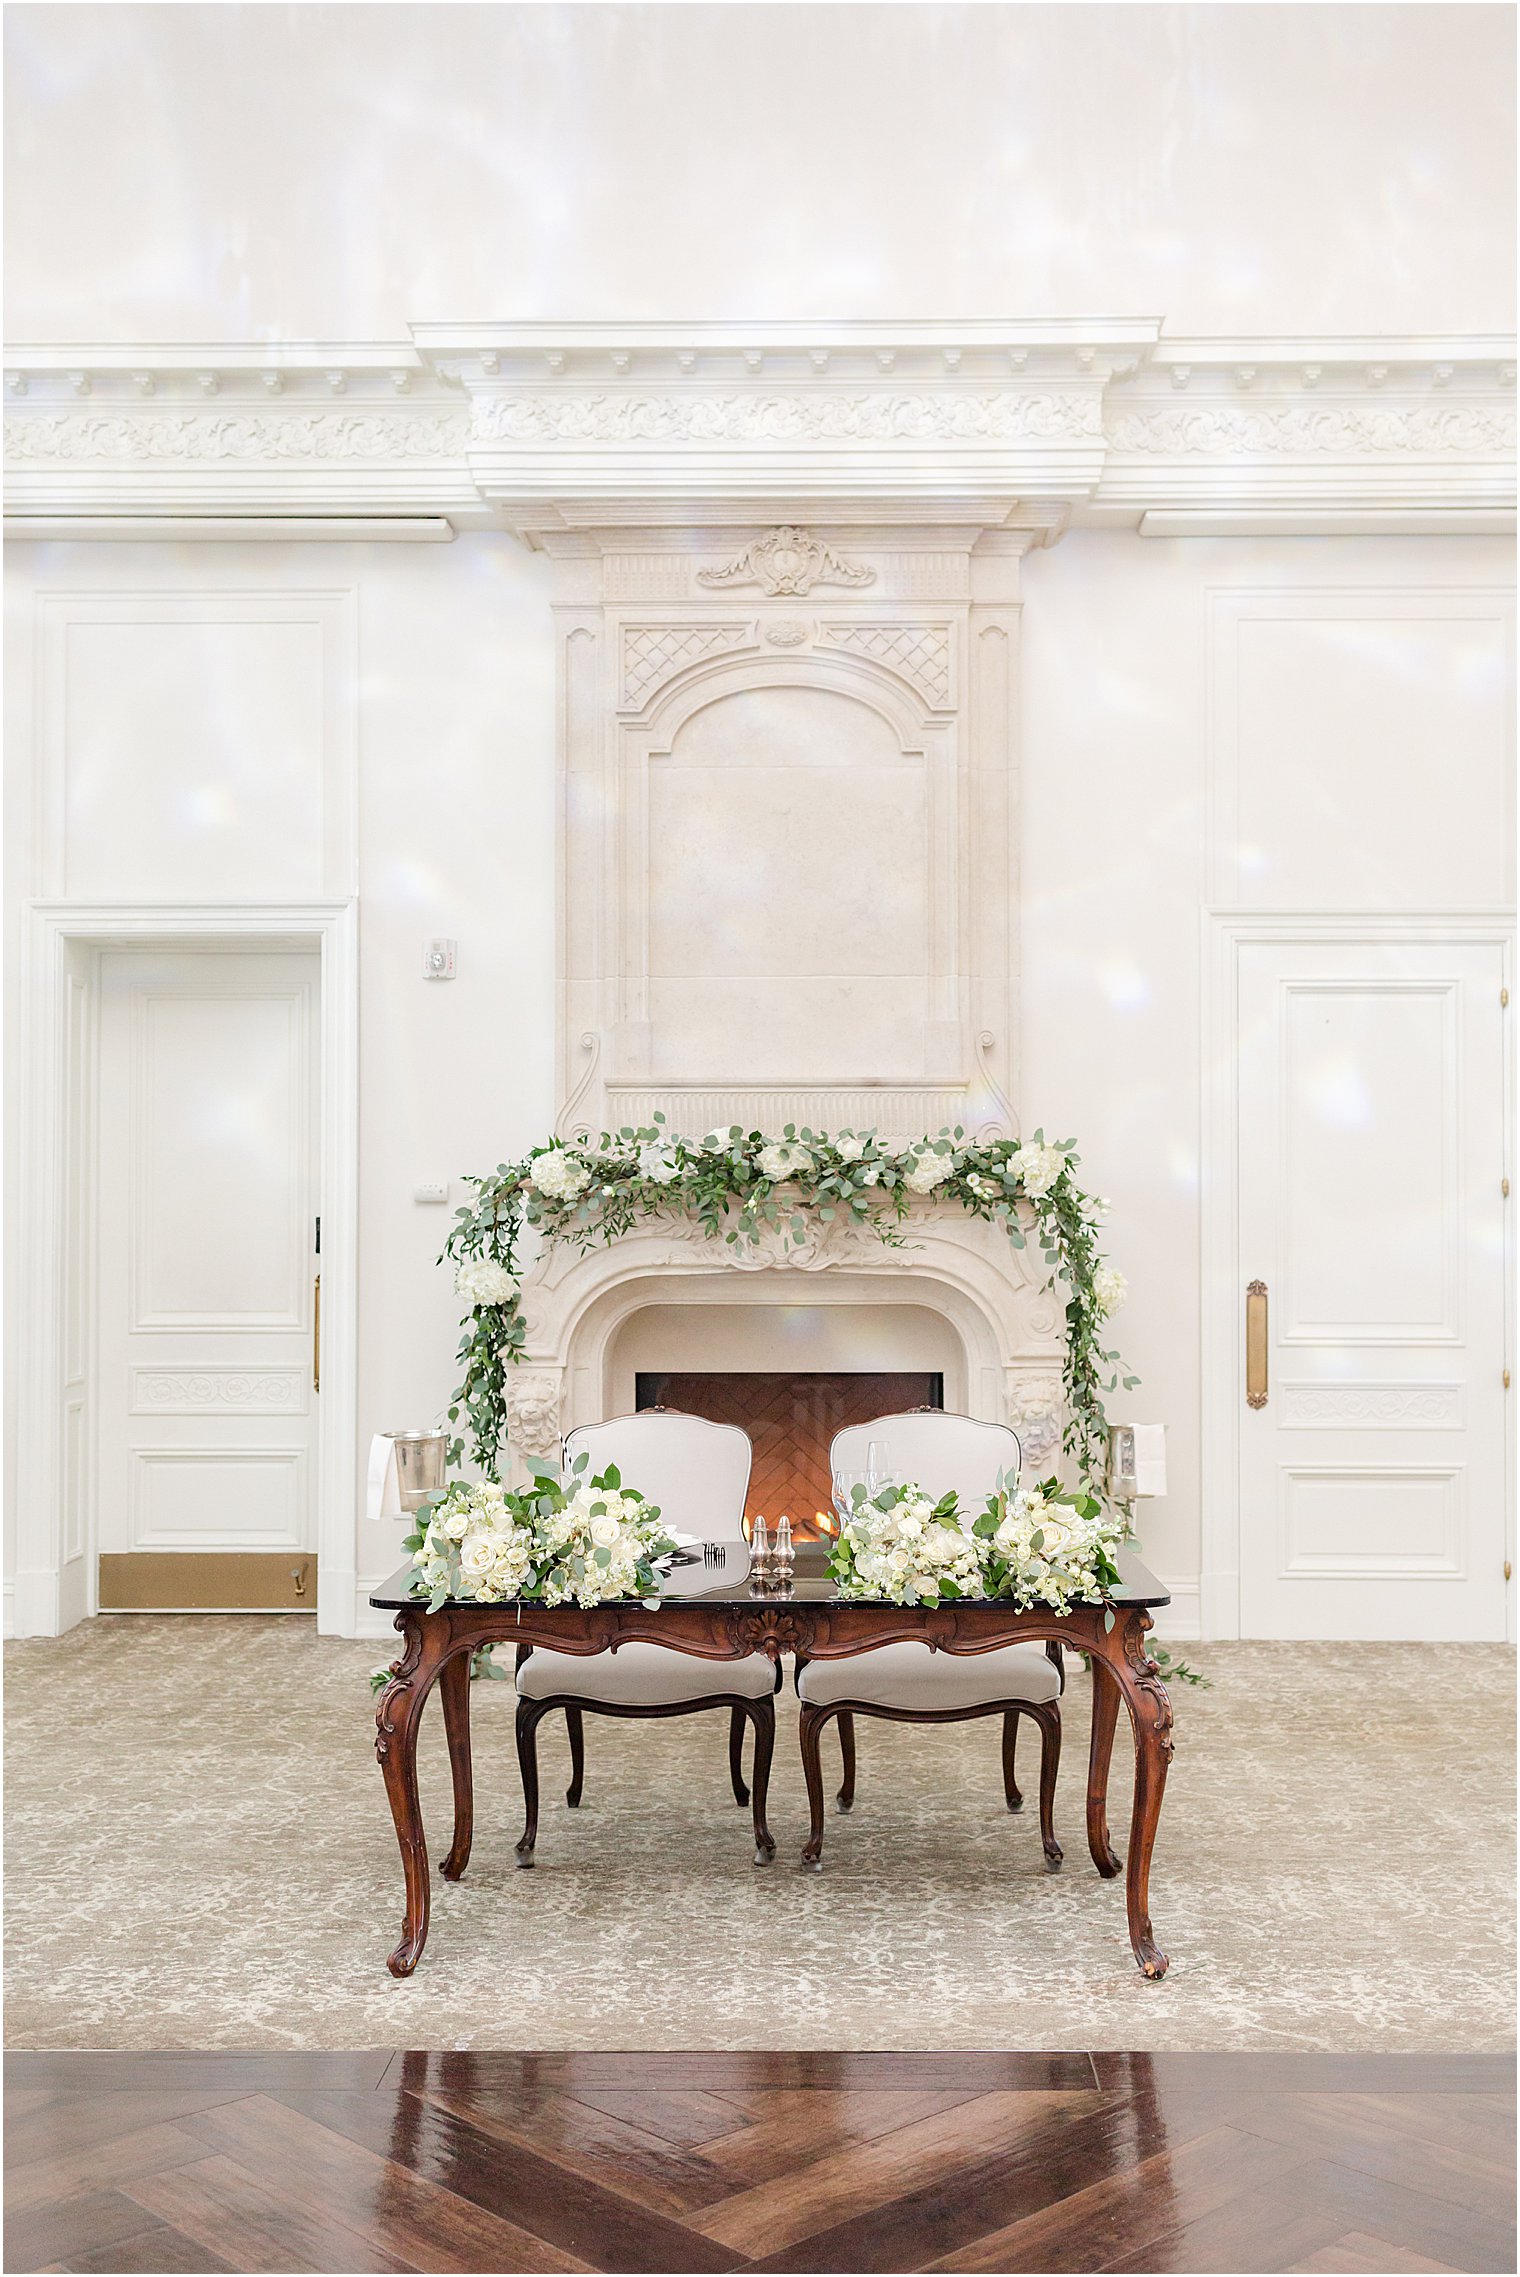 sweetheart table draped with white flowers and greenery by fireplace at Park Chateau Estate